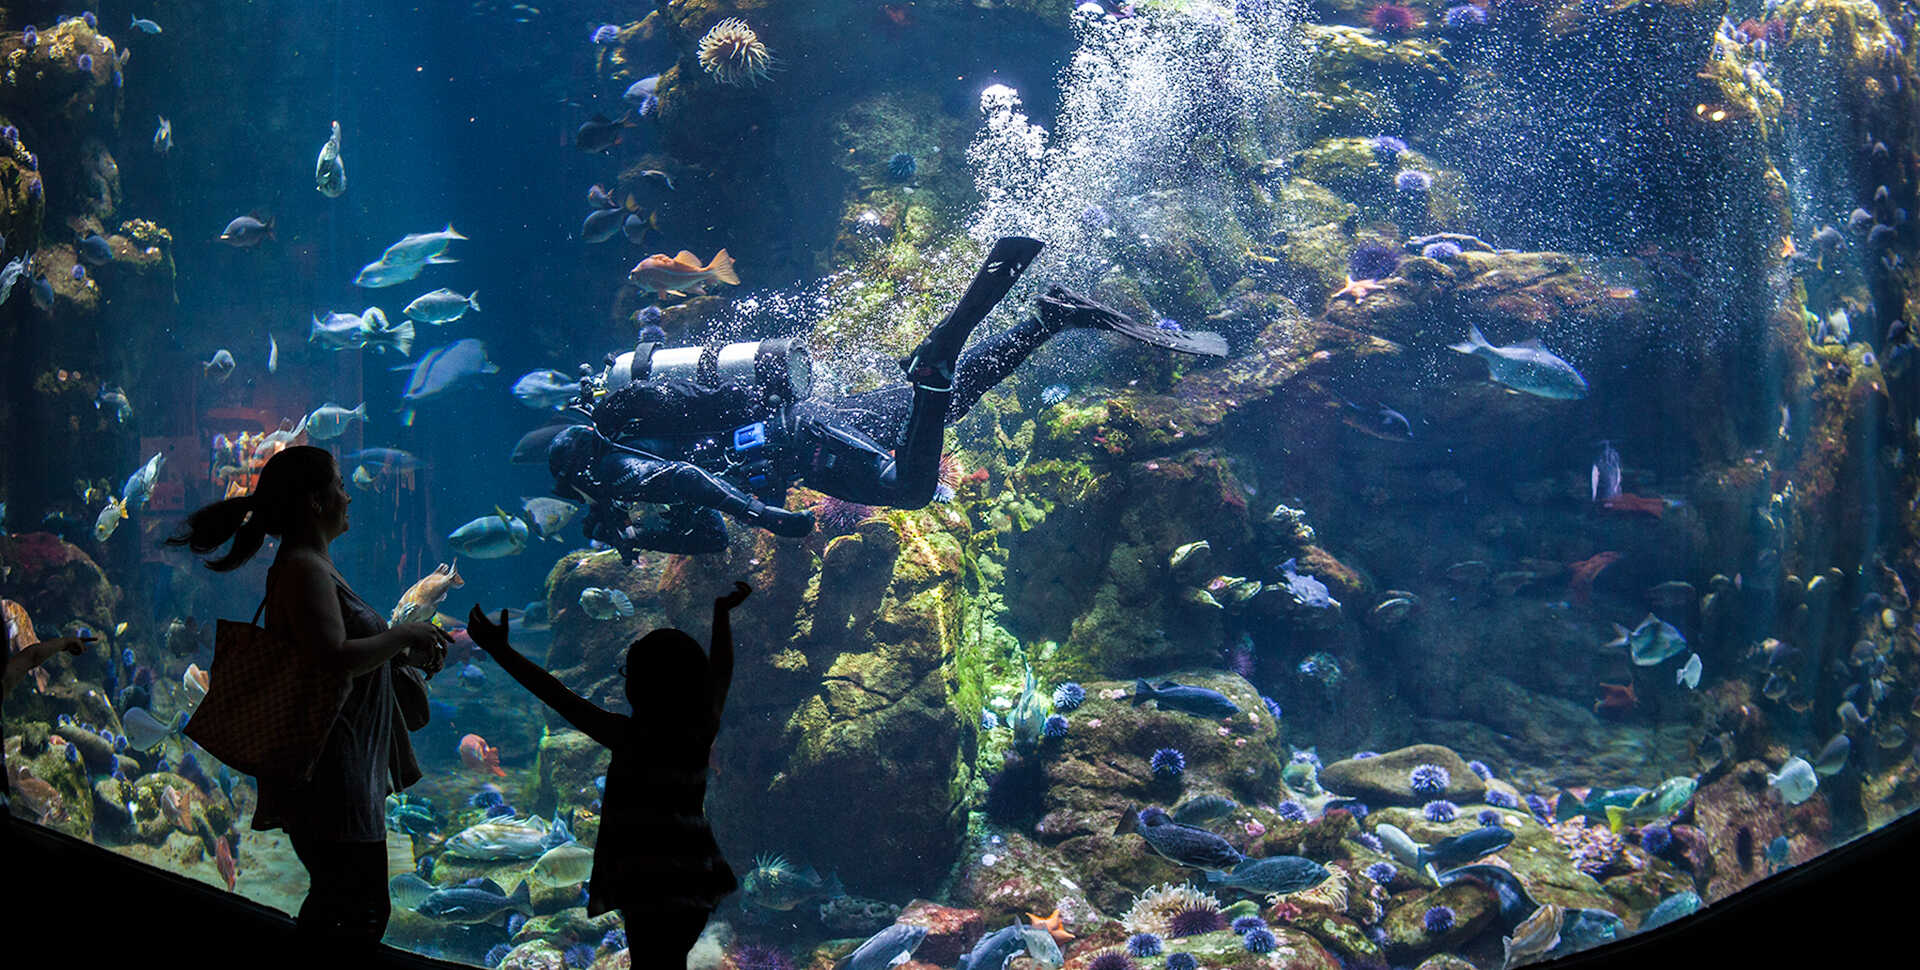 Explore the amazing richness and diversity found in California's coastal waters.